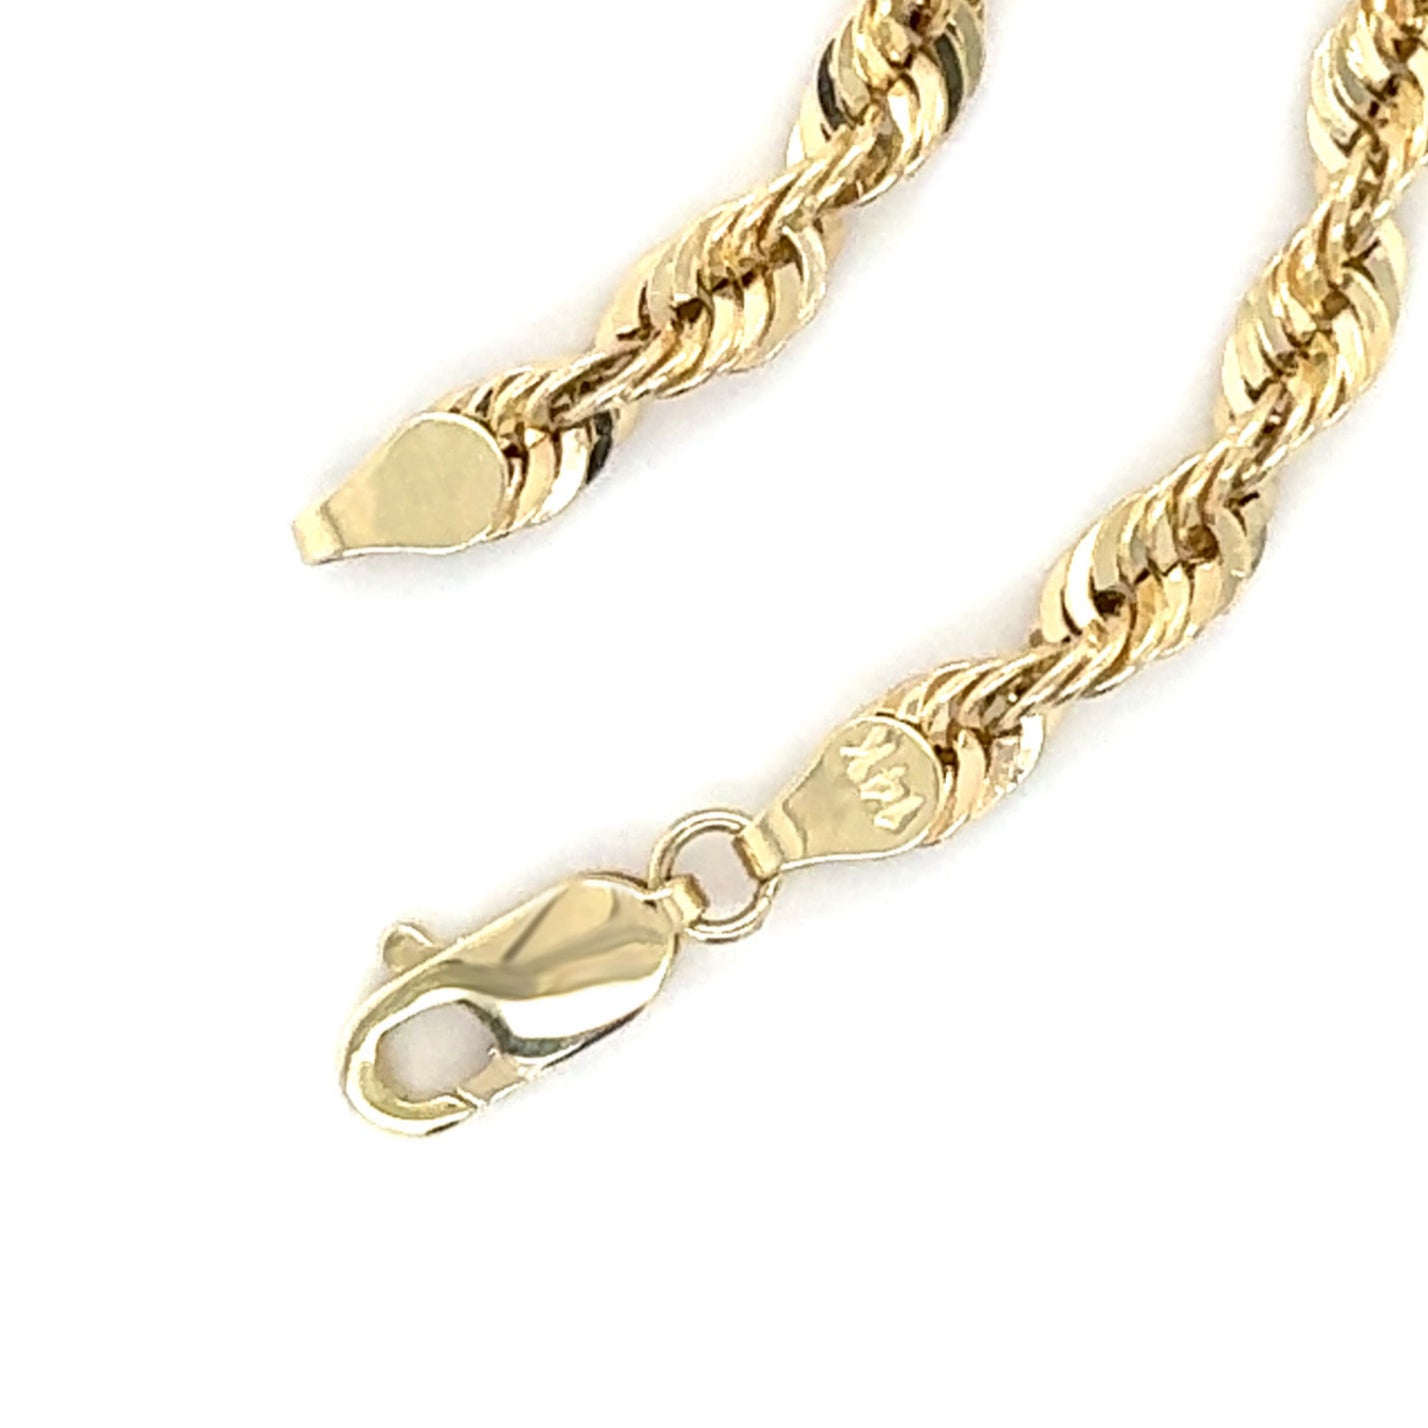 14K YELLOW GOLD THICK ROPE CHAIN NECKLACE WOMEN